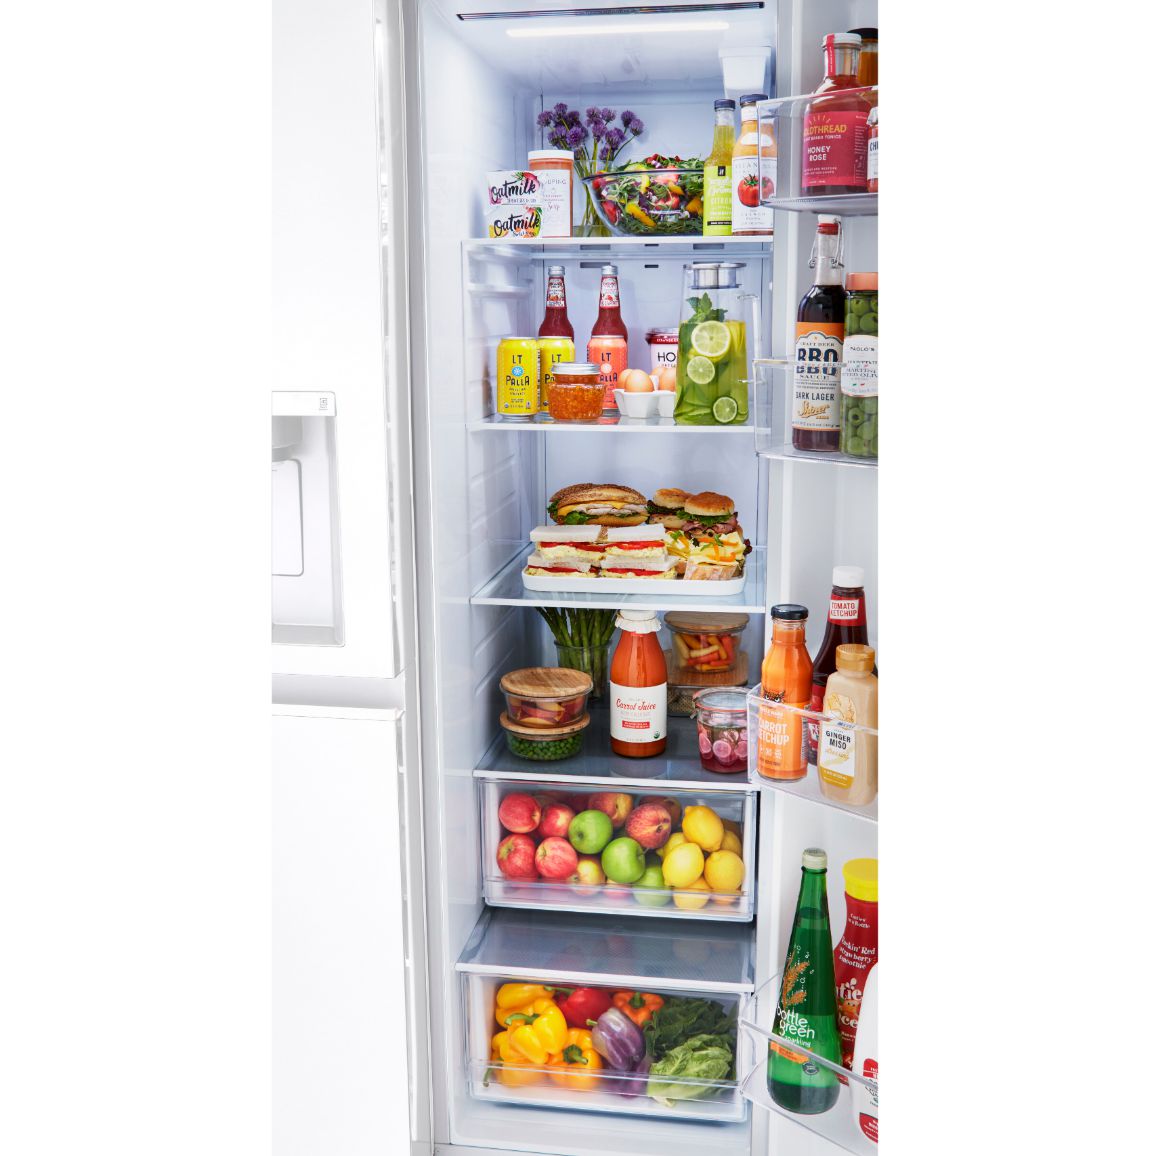 LG 36 Inch Side-by-Side Refrigerator in Smooth White 27 Cu. Ft. (LRSXS2706W)